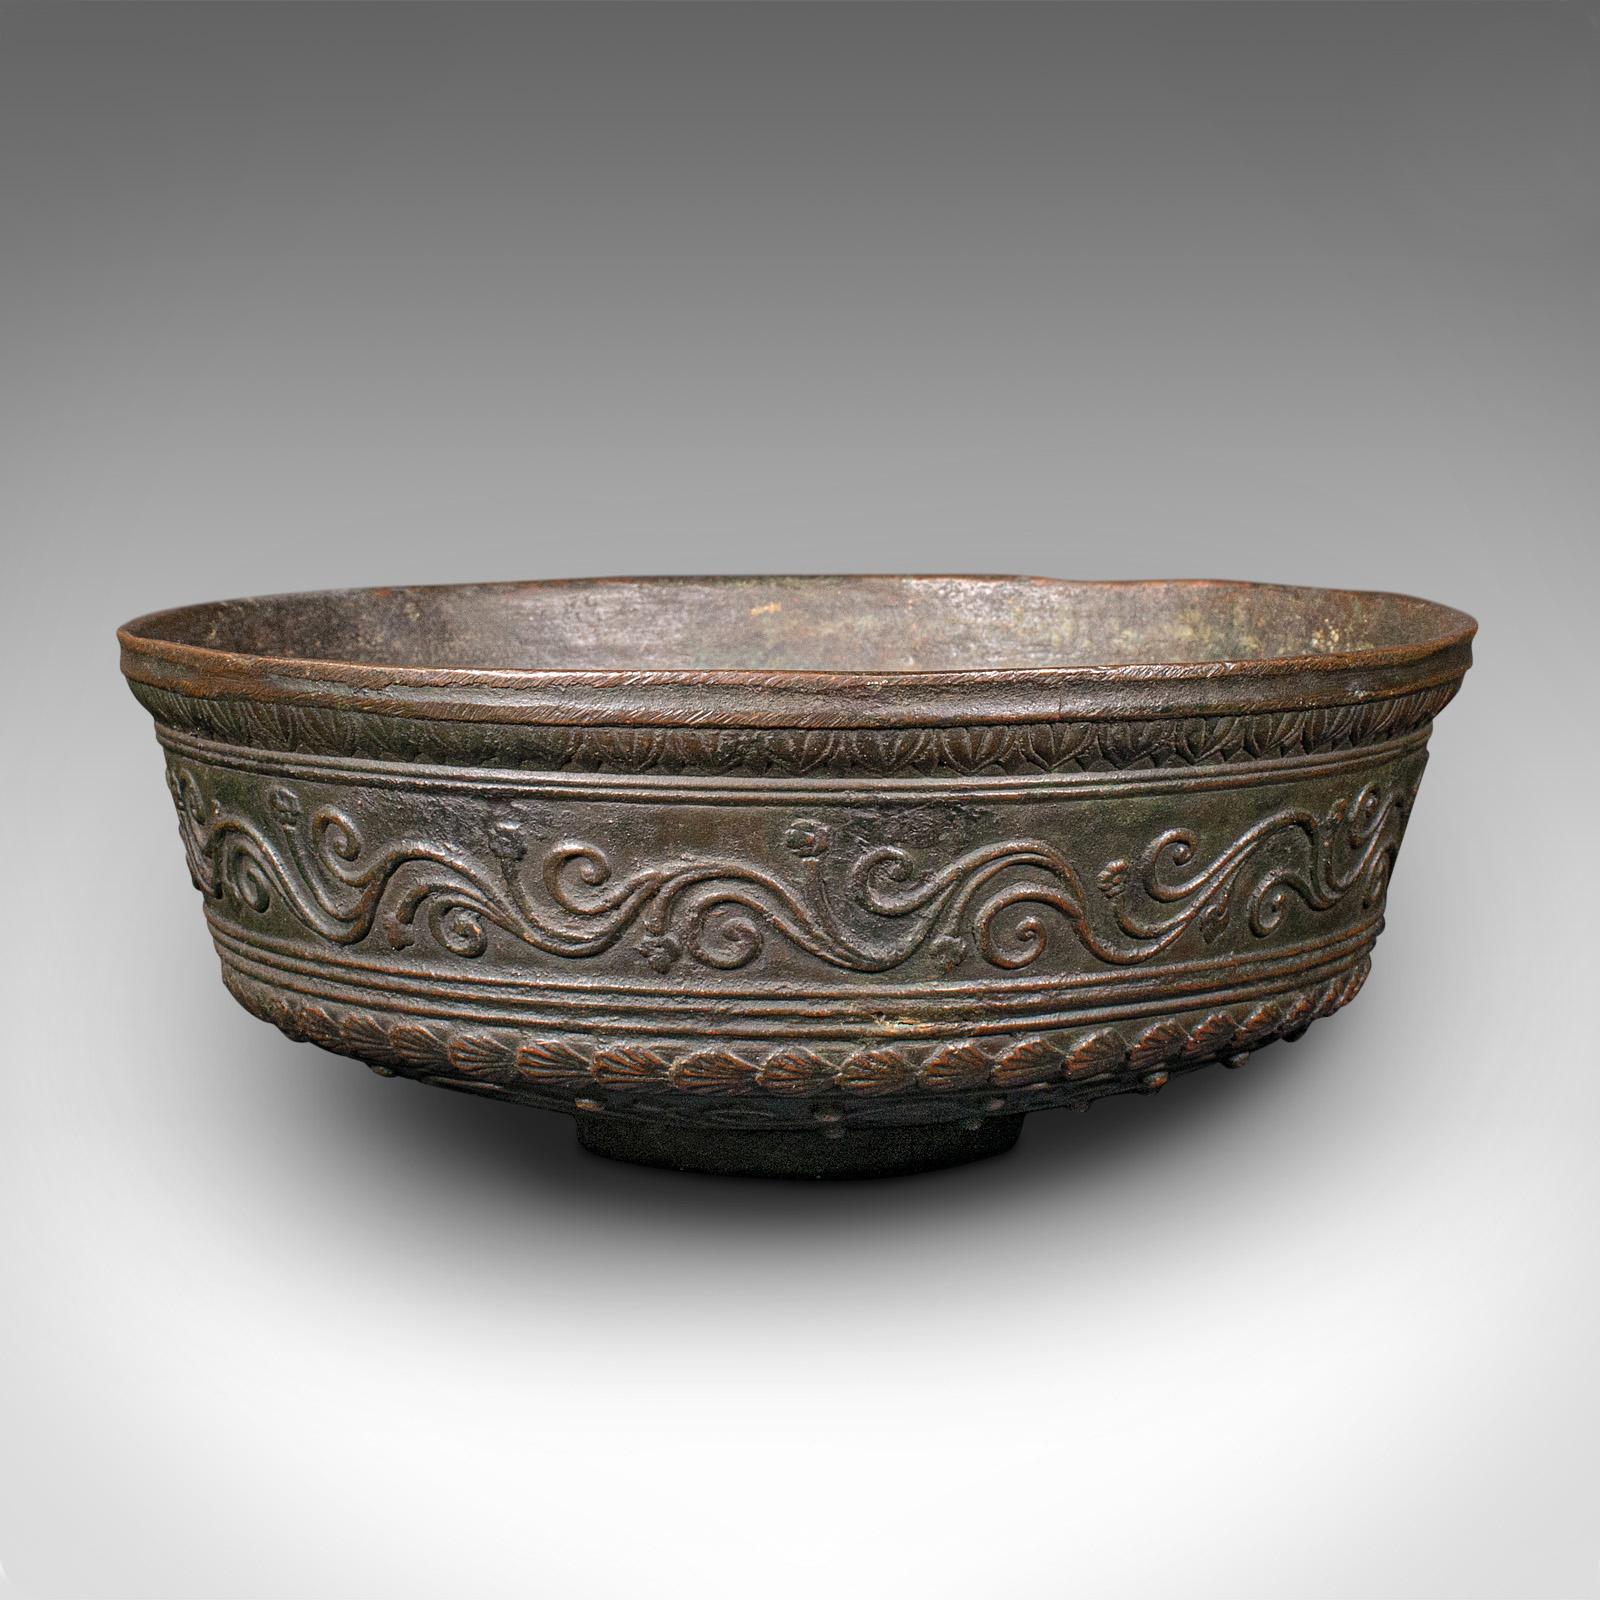 This is an antique decorative bowl. A Japanese, bronze censer from the Edo period, dating to the 18th century, circa 1750.

Pleasingly decorative dish with animal and scroll detail
Displays a desirable aged patina, commensurate with age
Antique